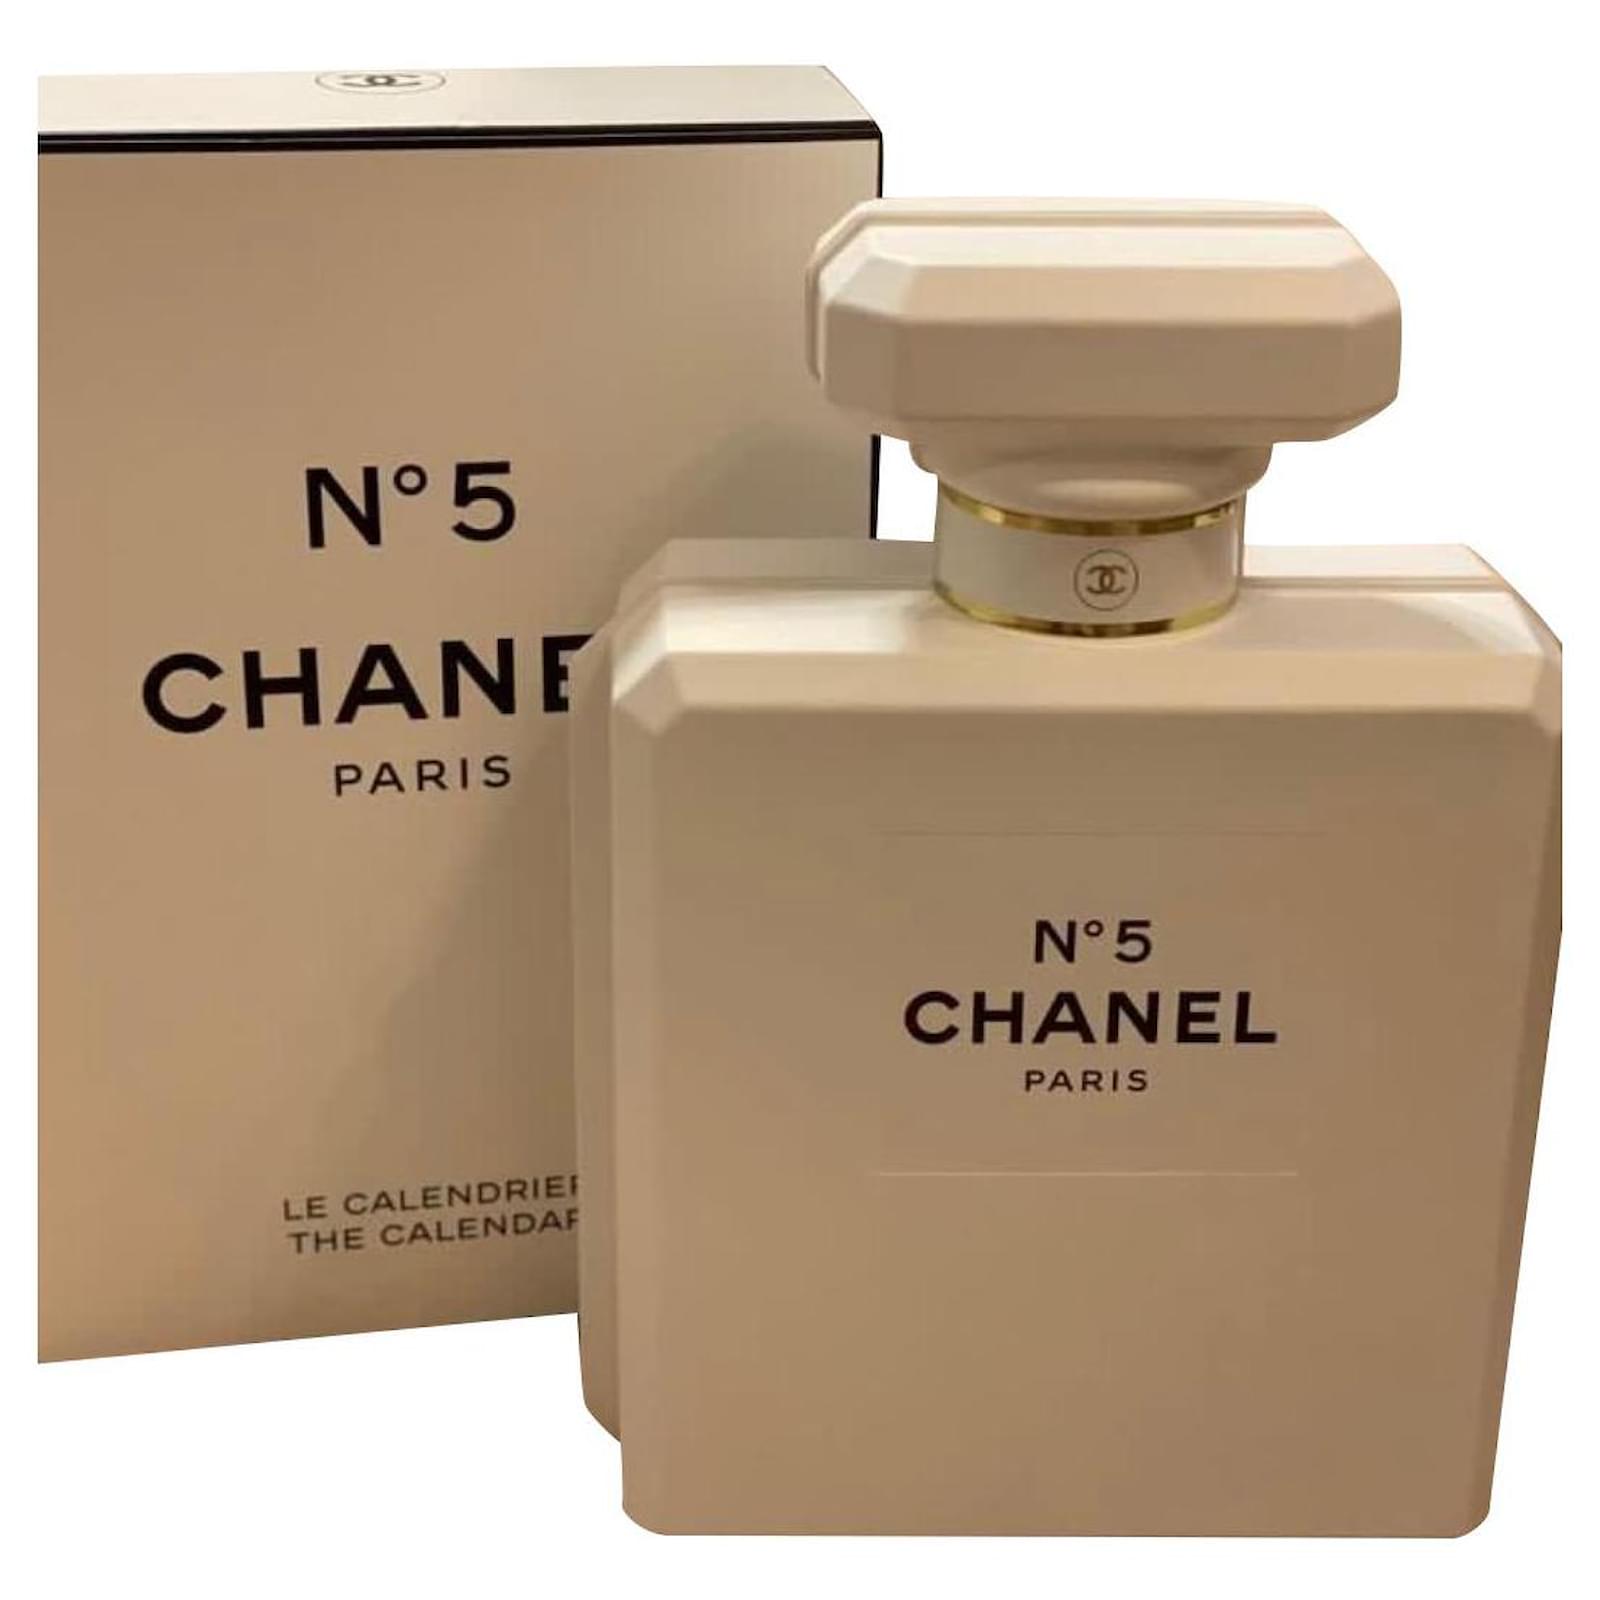 Chanel No5 Advent Calendar 2021 - Limited Edition - Contents